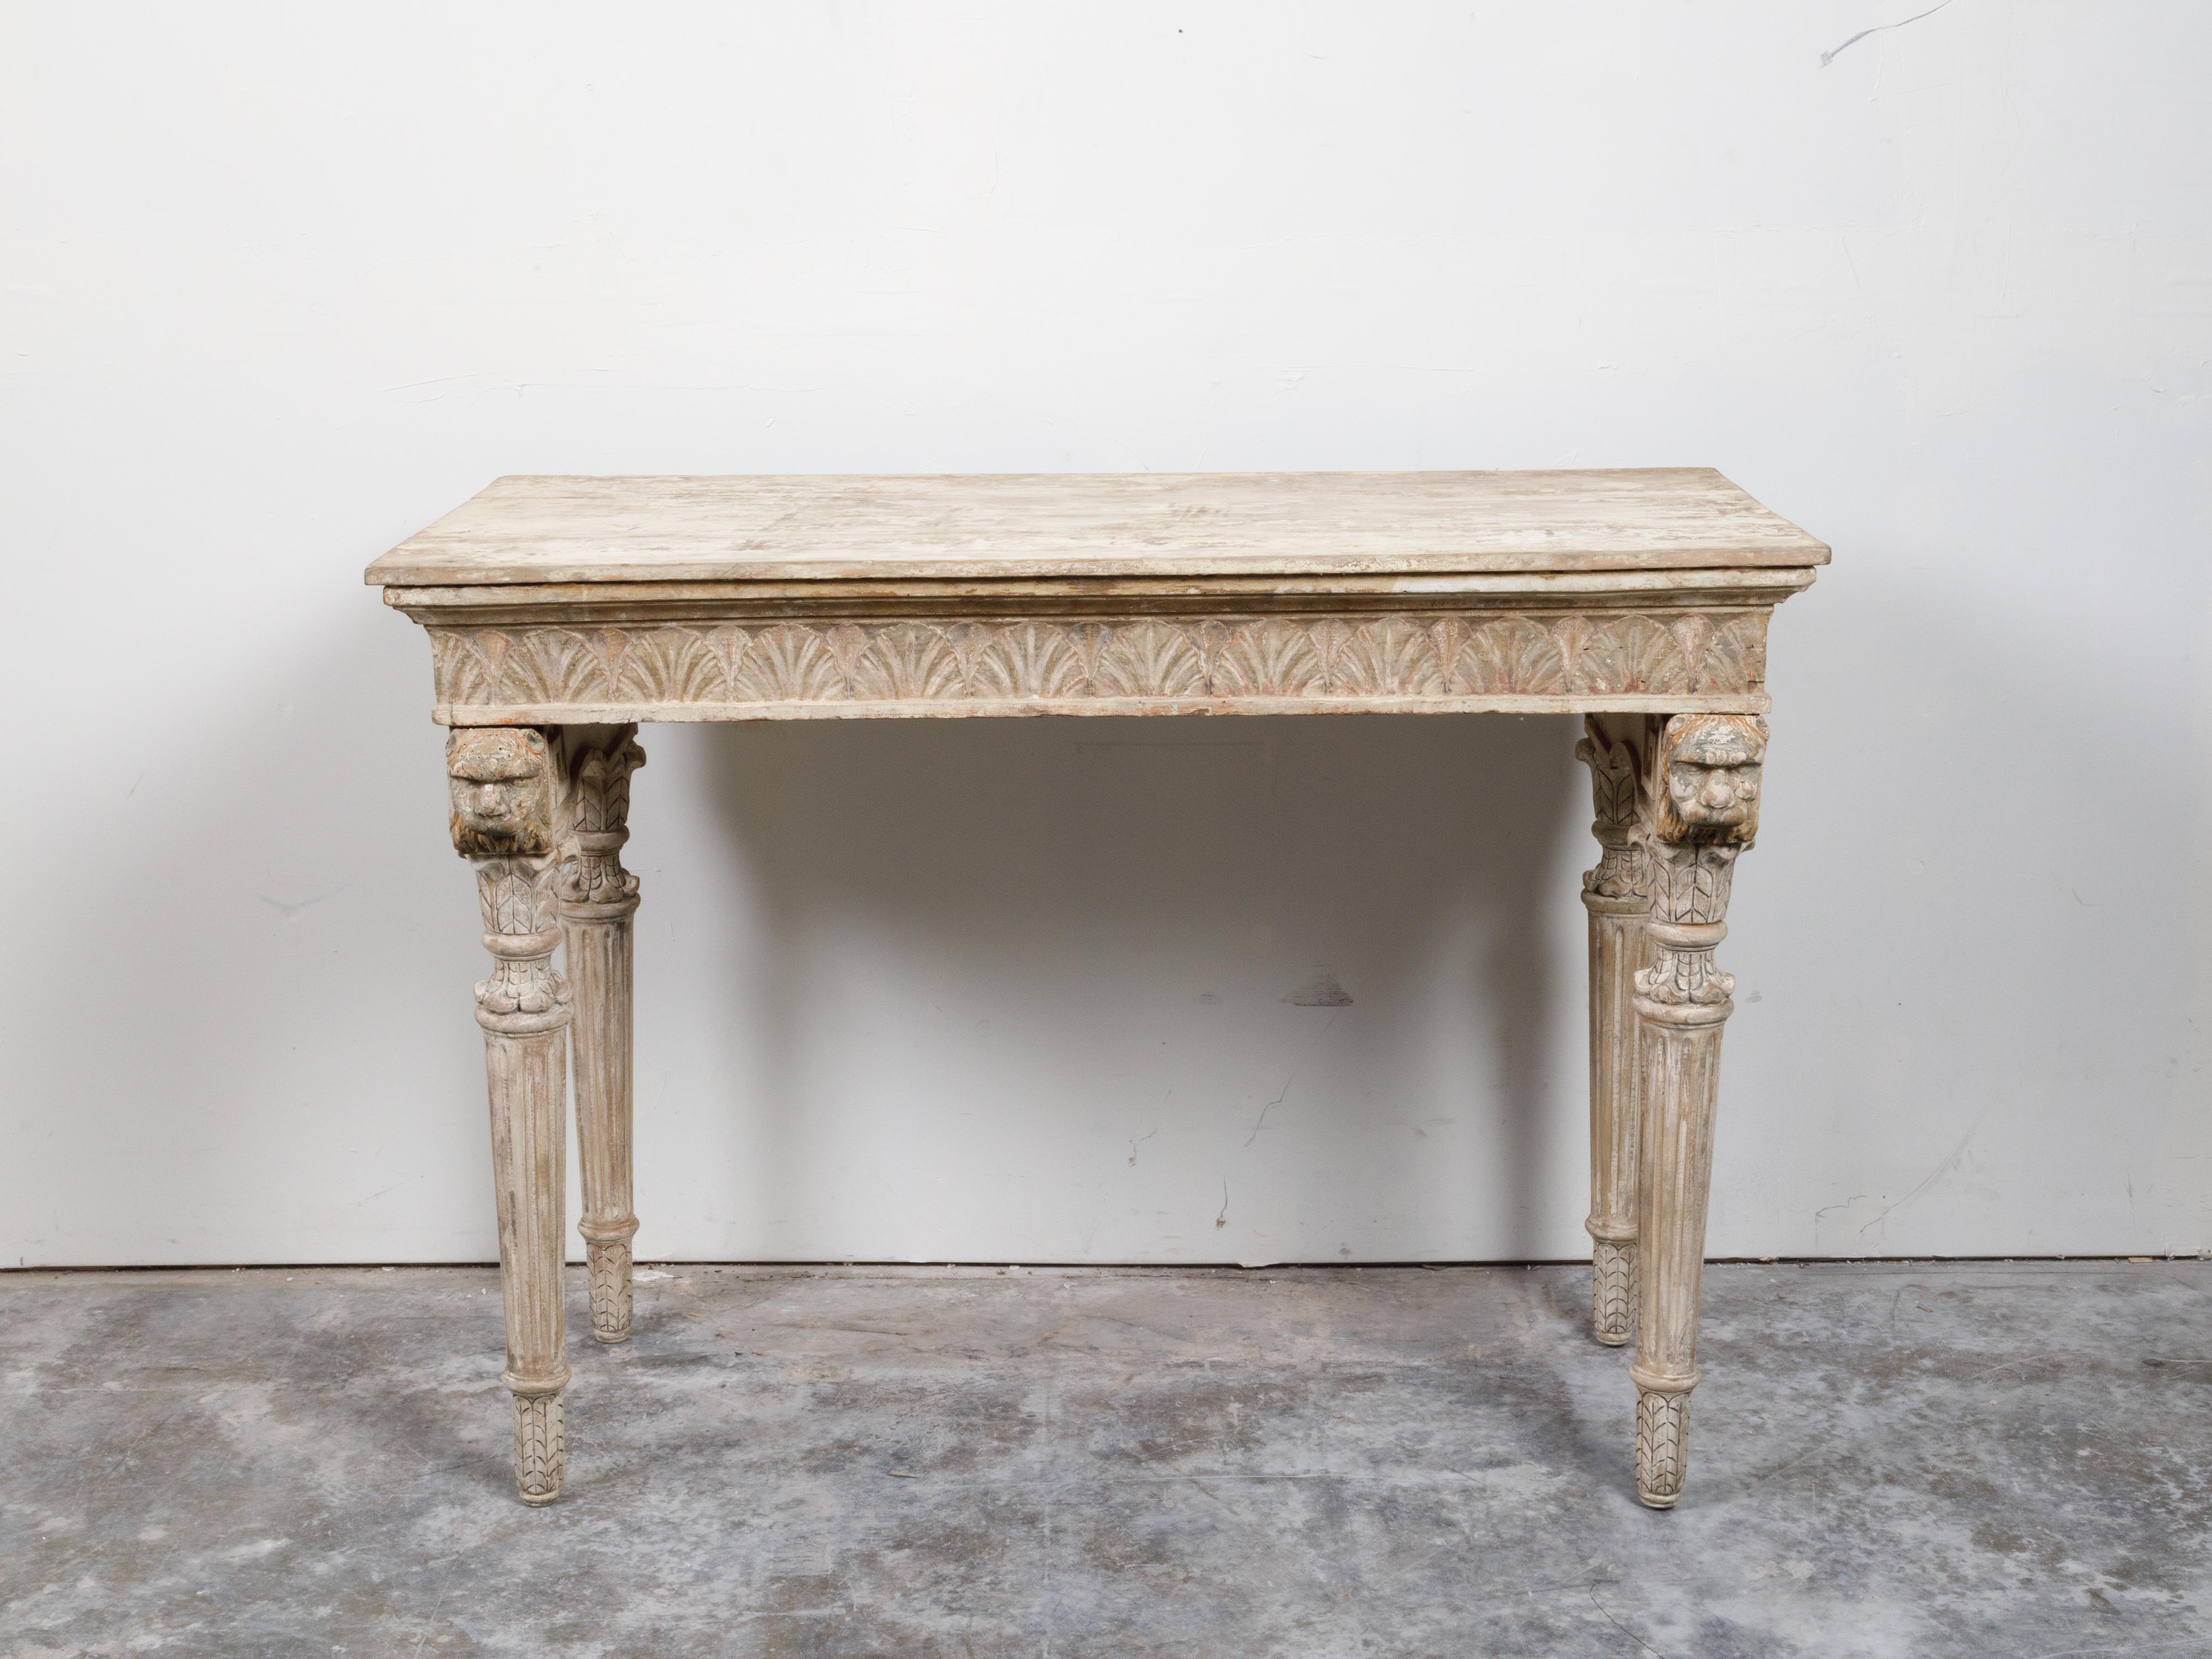 An Italian Neoclassical console table from the 18th century, with carved animals, fluted legs and distressed patina. Created in Italy during the 18th century, this console table features a rectangular top with nice aging, sitting above an apron